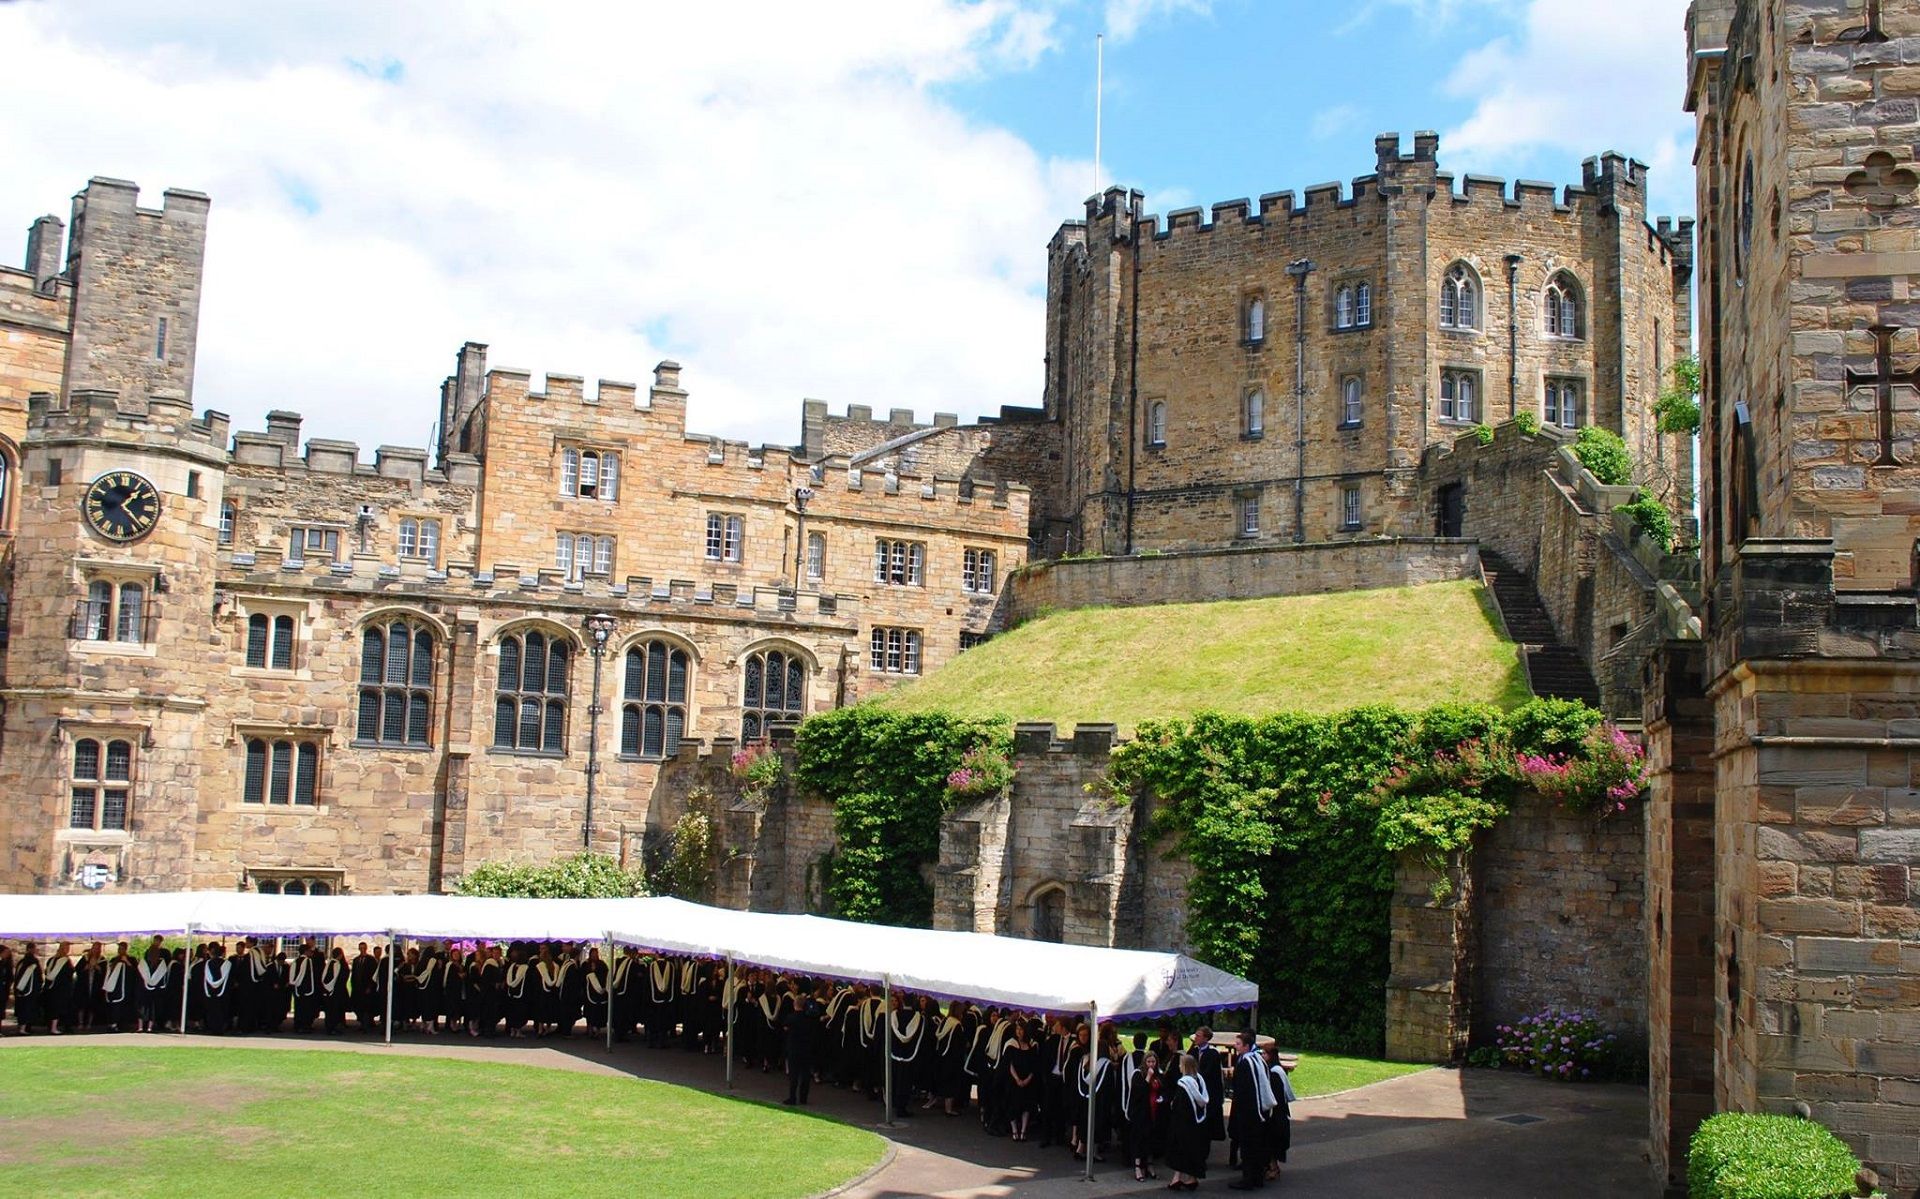 Photograph of the Keep of Durham Castle from the Courtyard, on the right is the Gatehouse, at the top right is the Keep and then on the left the Tunstall Gallery, Chapel and Tower.